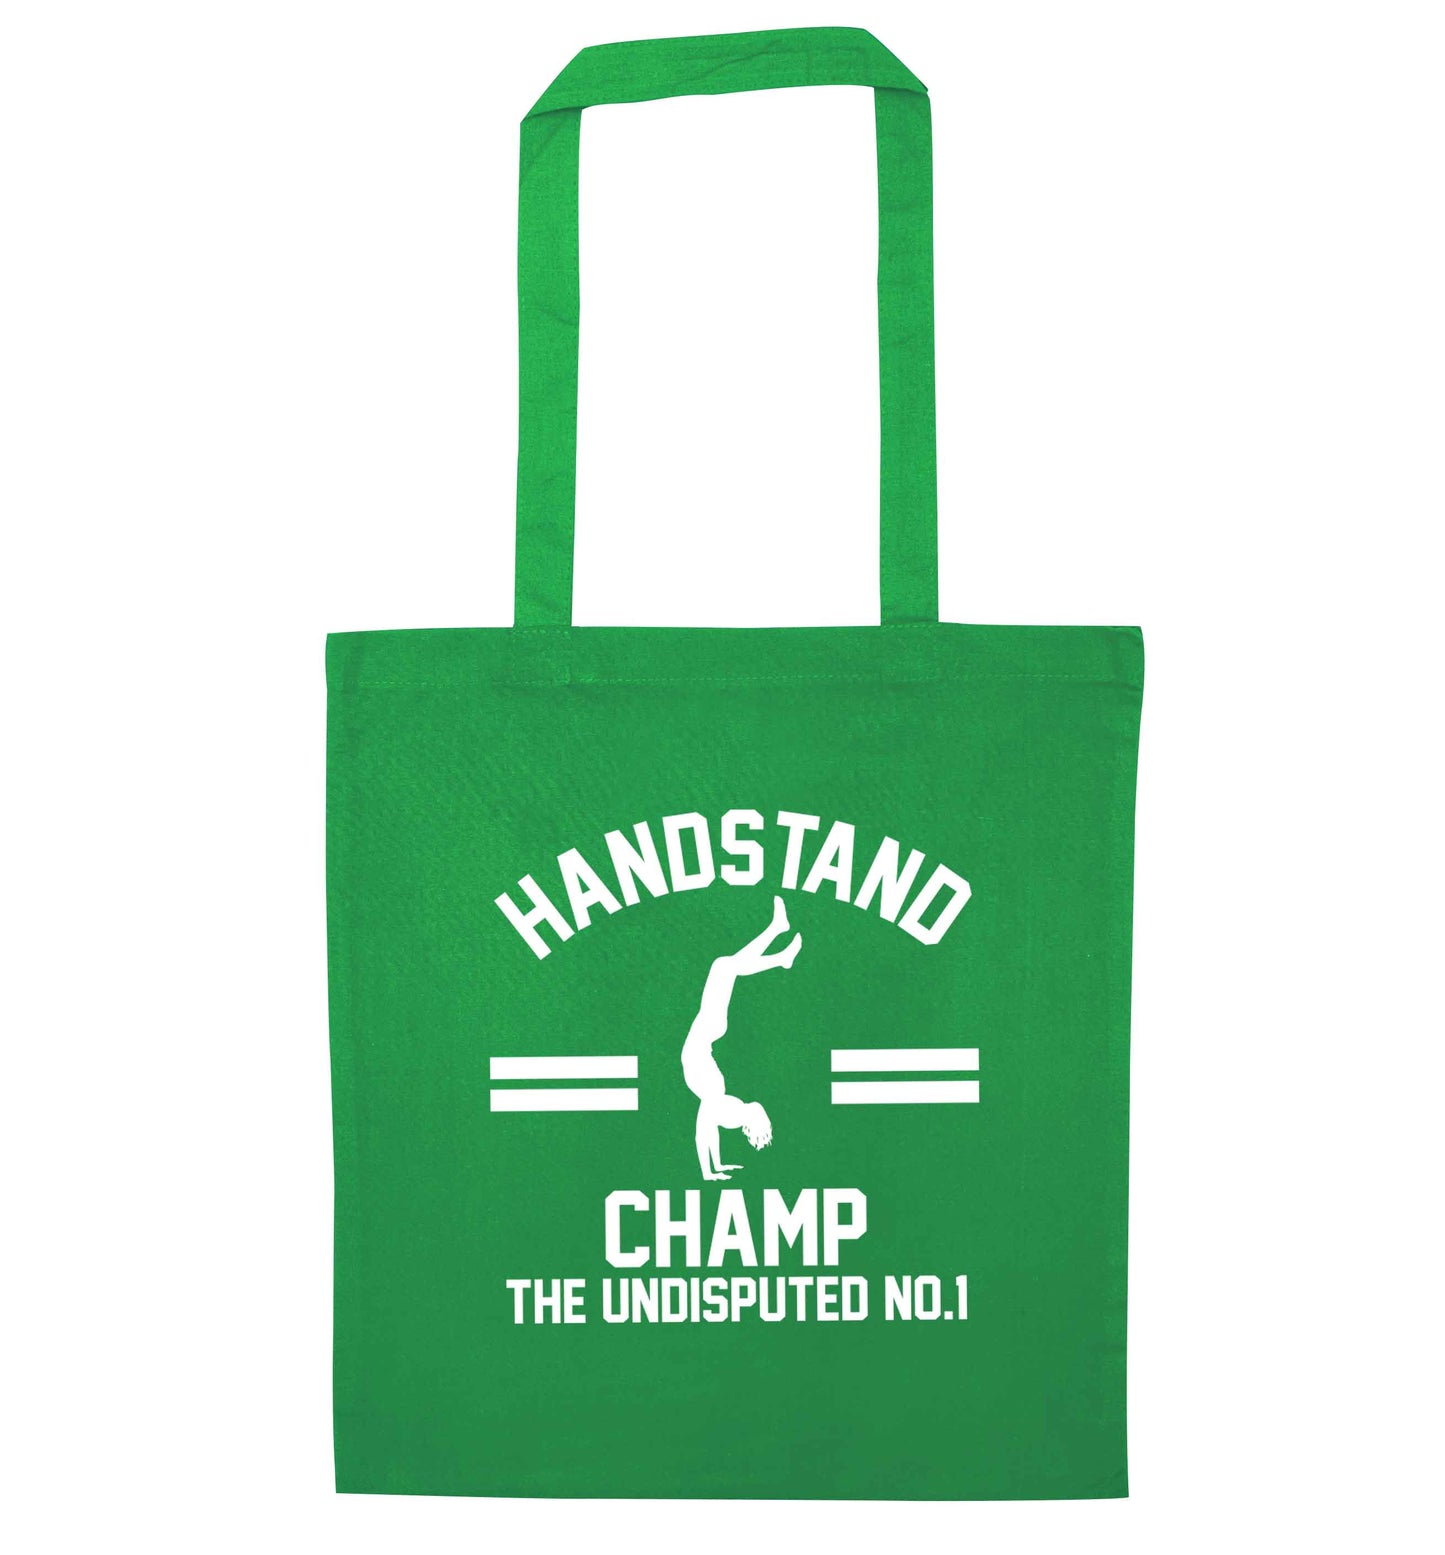 Undisputed handstand championship no.1  green tote bag